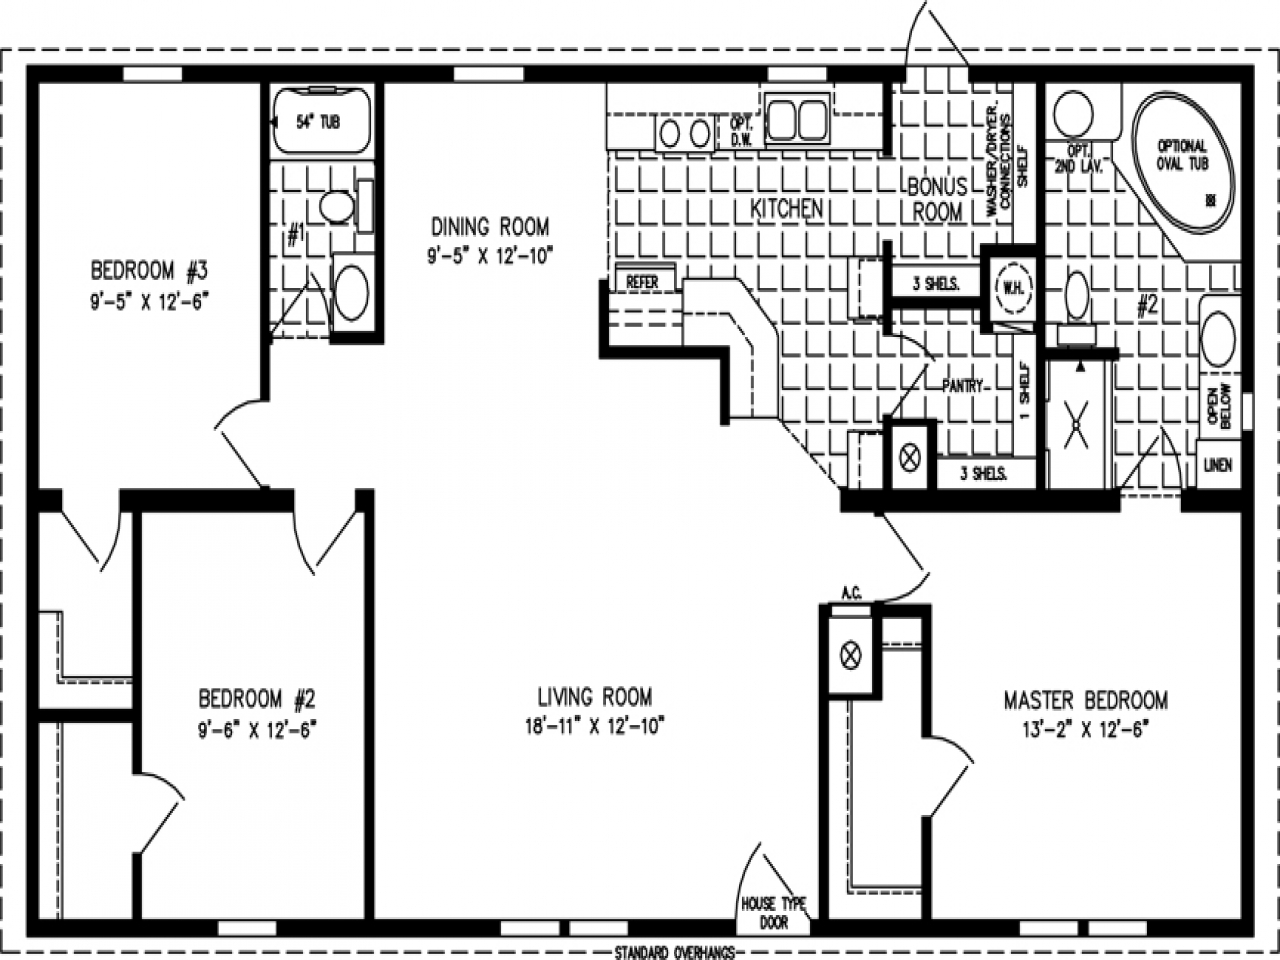 1200 Square Feet Home 1200 Sq FT Home Floor Plans, small